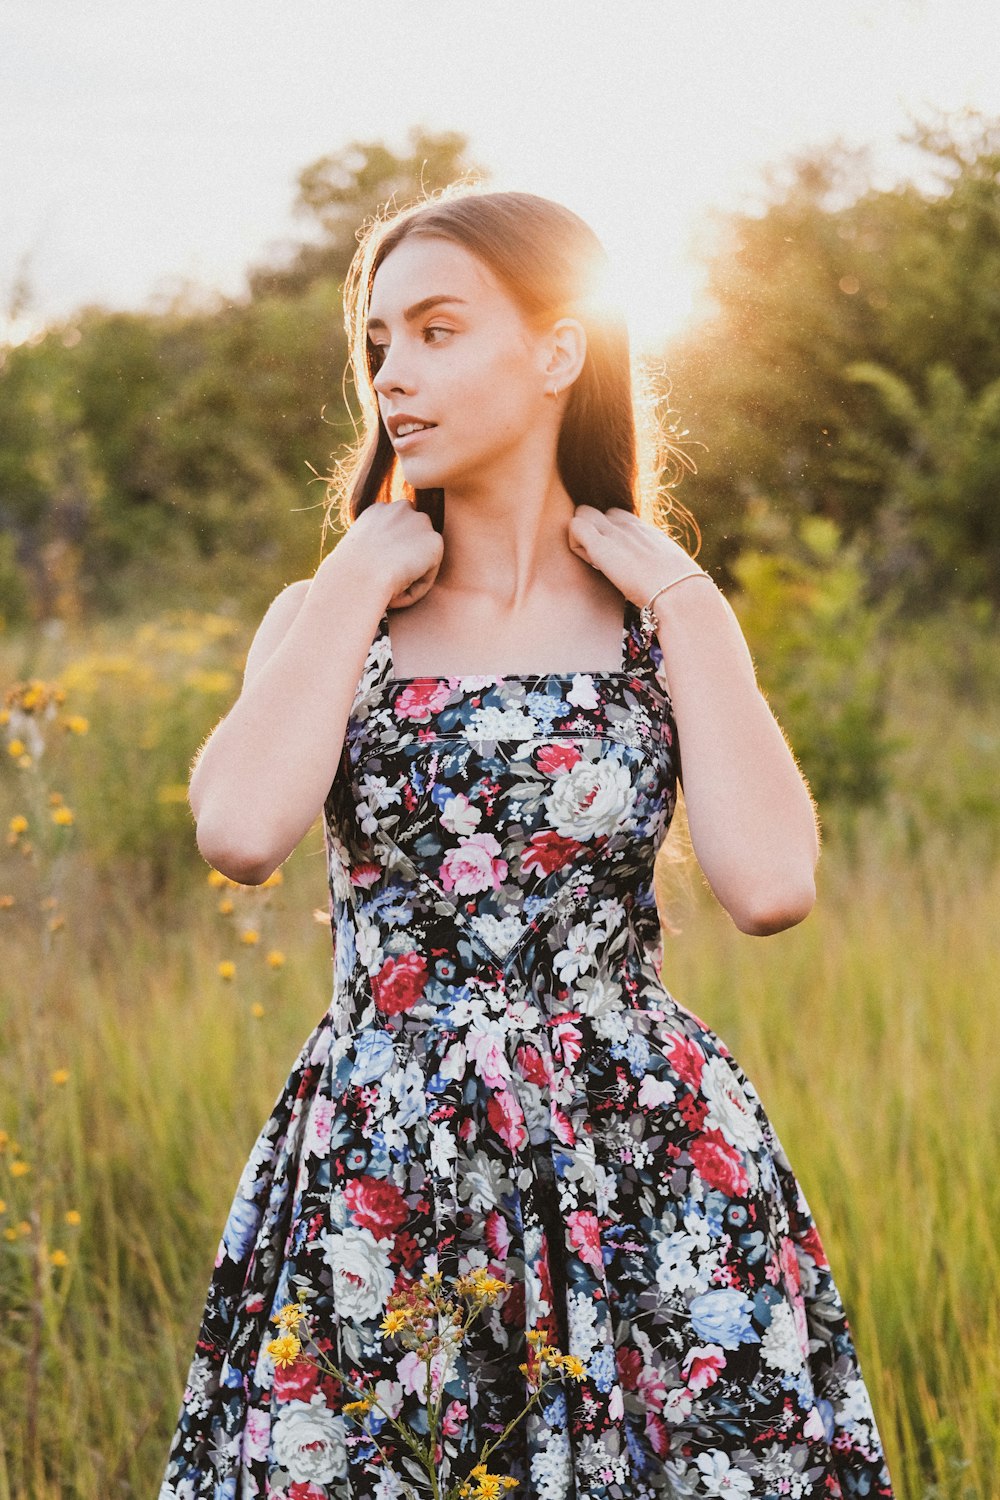 Beautiful Dress Pictures | Download Free Images on Unsplash